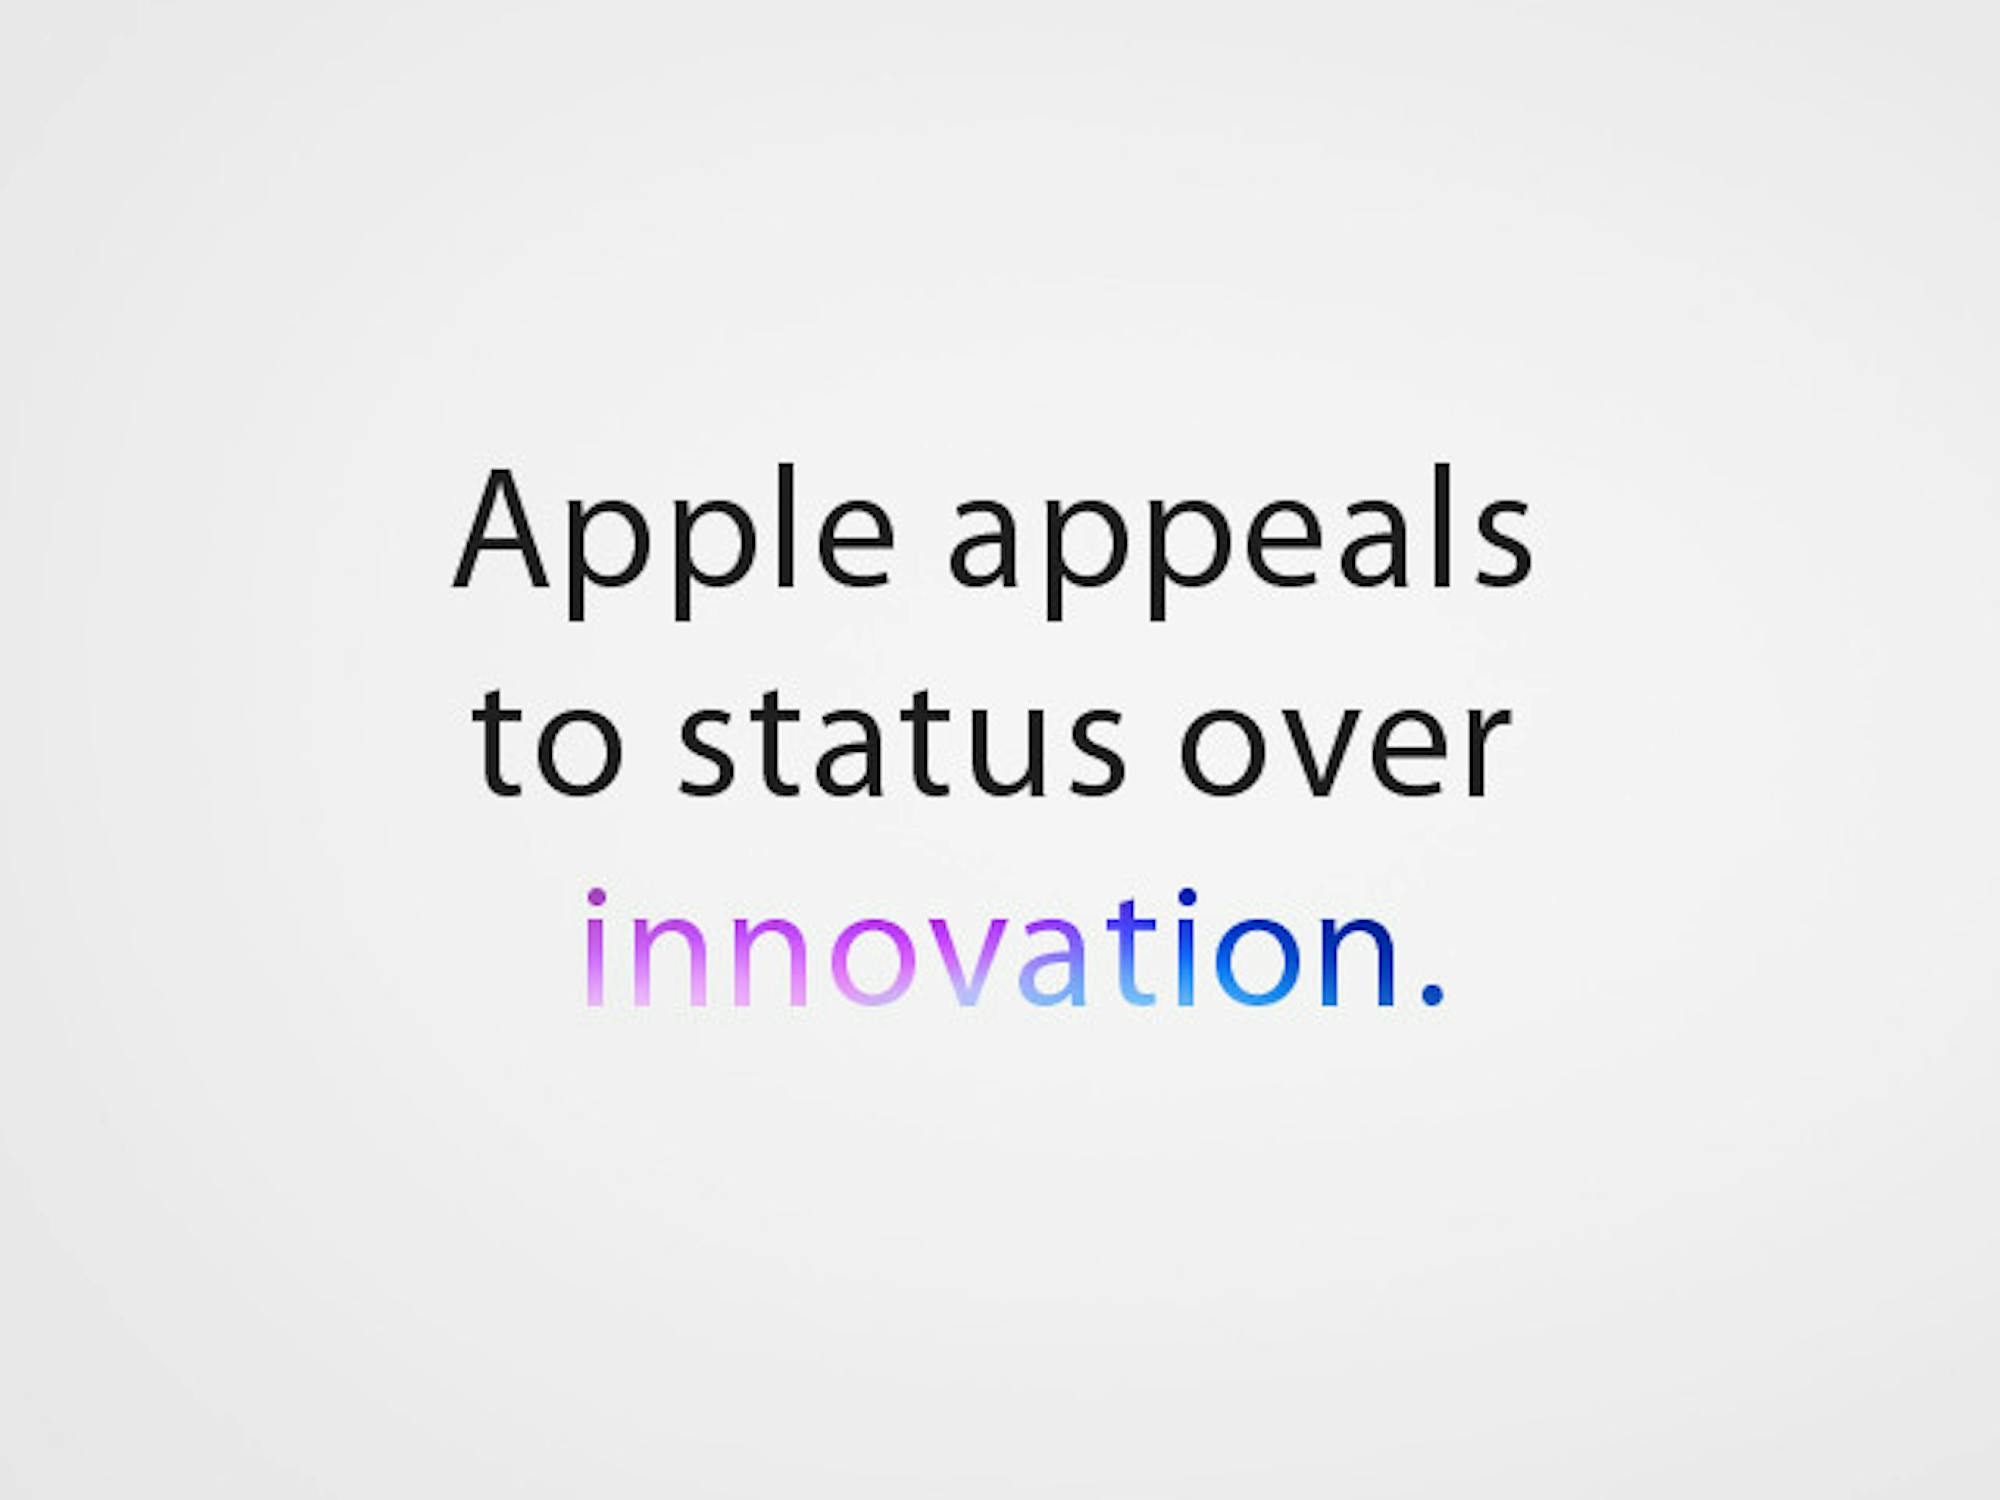 web_apple appeals to status over innovation_9-18-2014